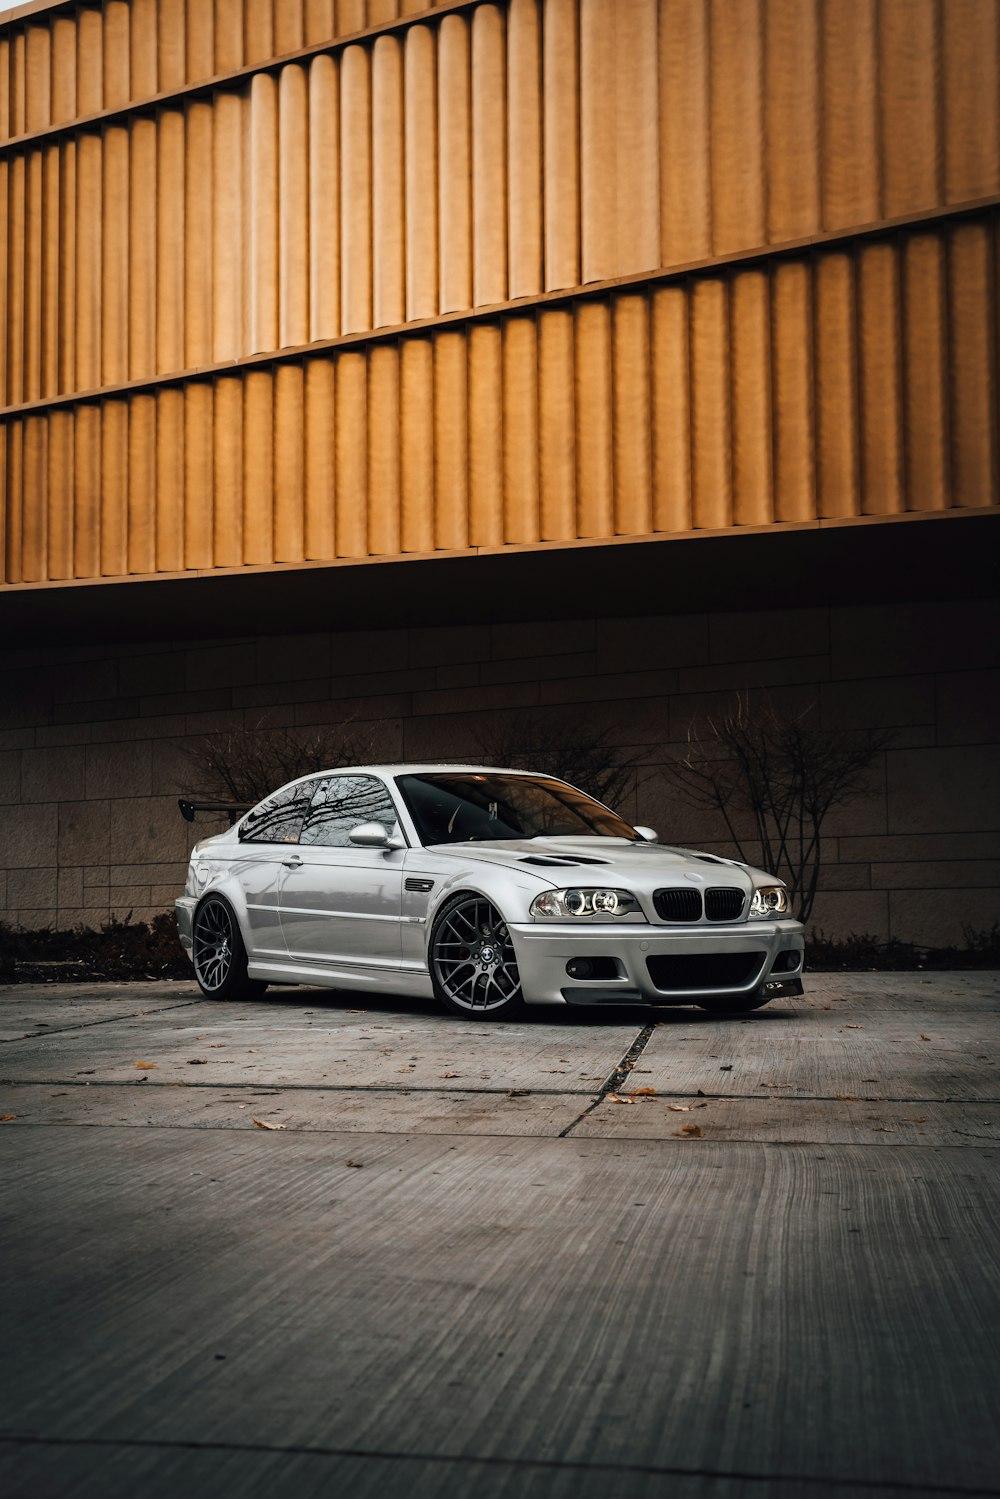 Bmw E46 Pictures Image